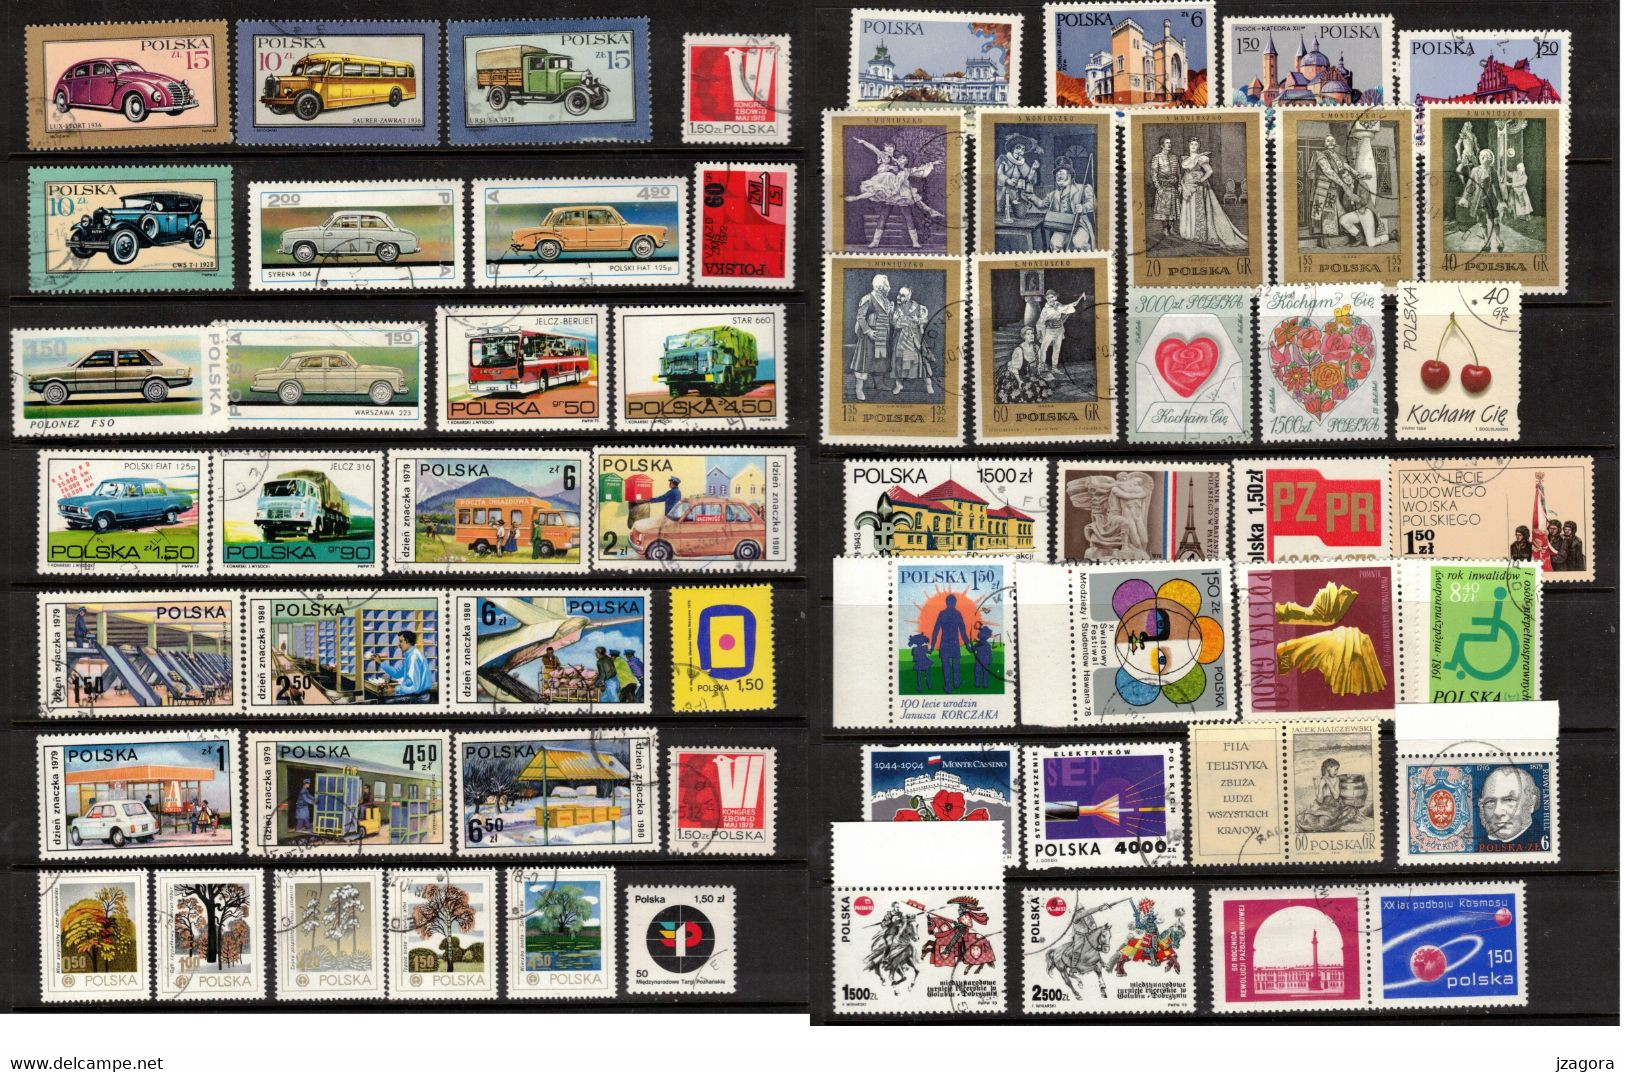 CARS AUTO VIEILLE VOITURE OPERA  POLAND POLEN POLOGNE COLLECTION 60 VARIOUS USED STAMPS MANY WITH GUM - Collezioni